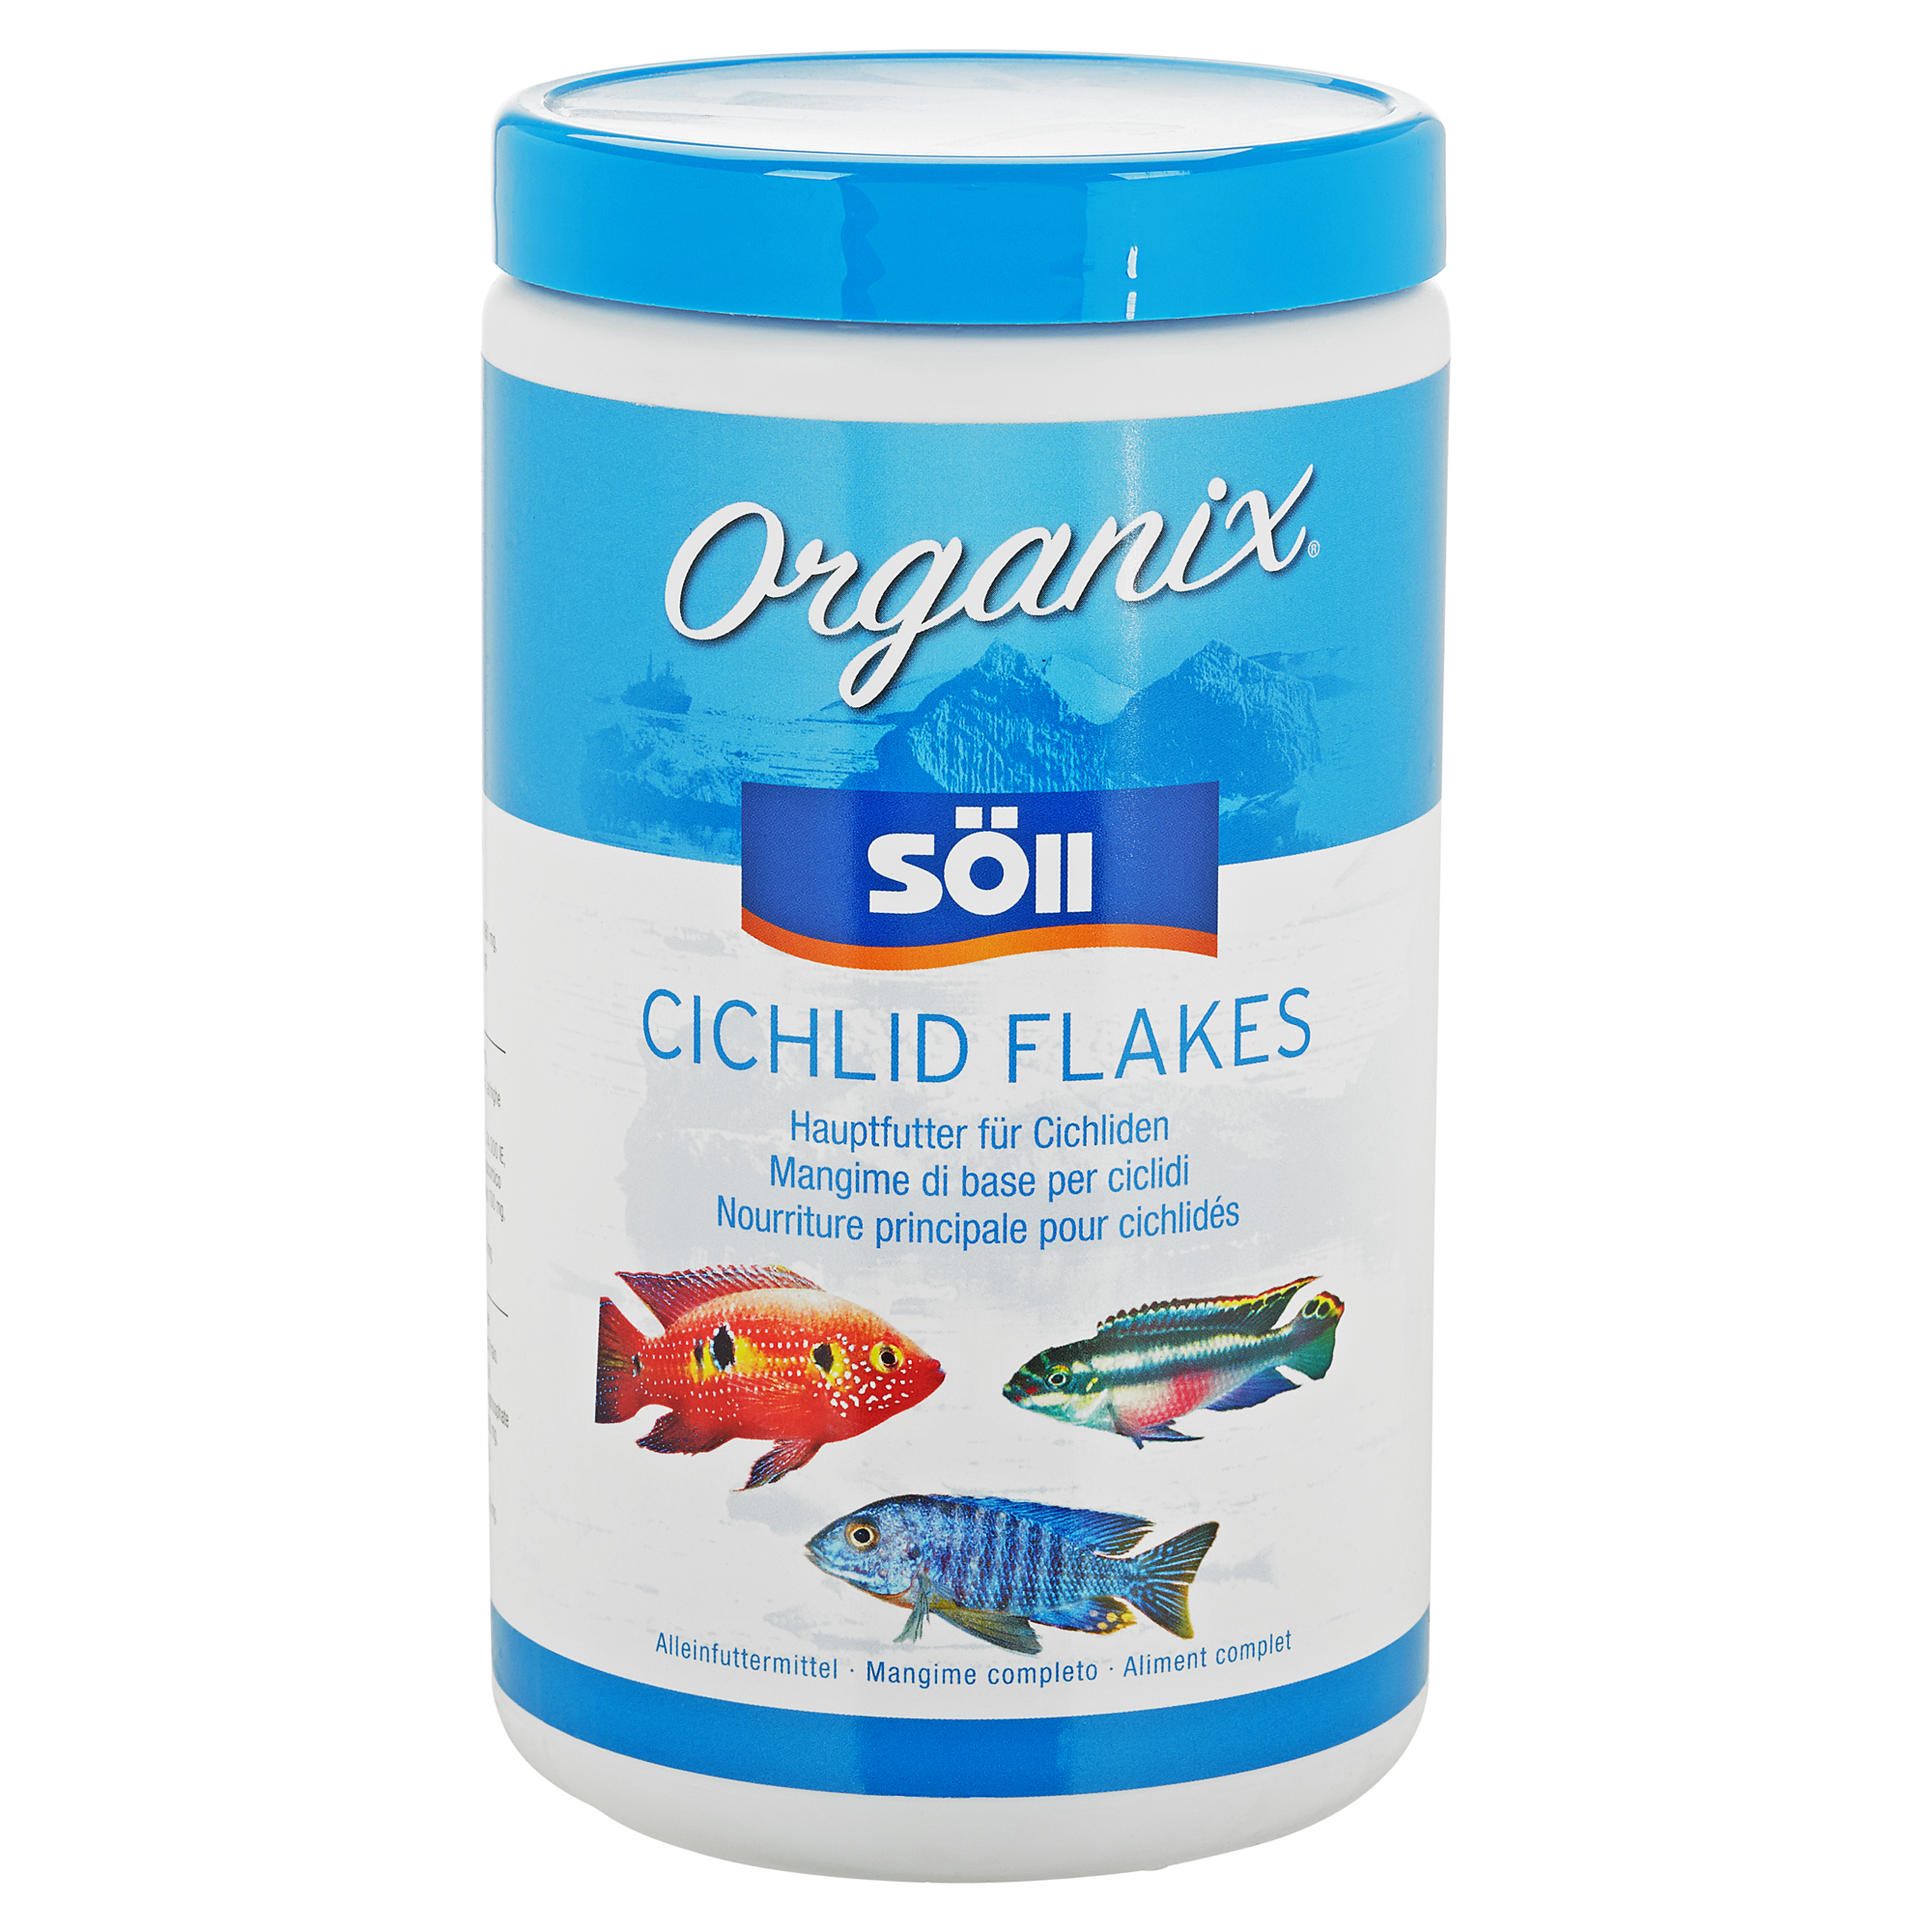 Organix Cichlid Flakes 1 l + product picture